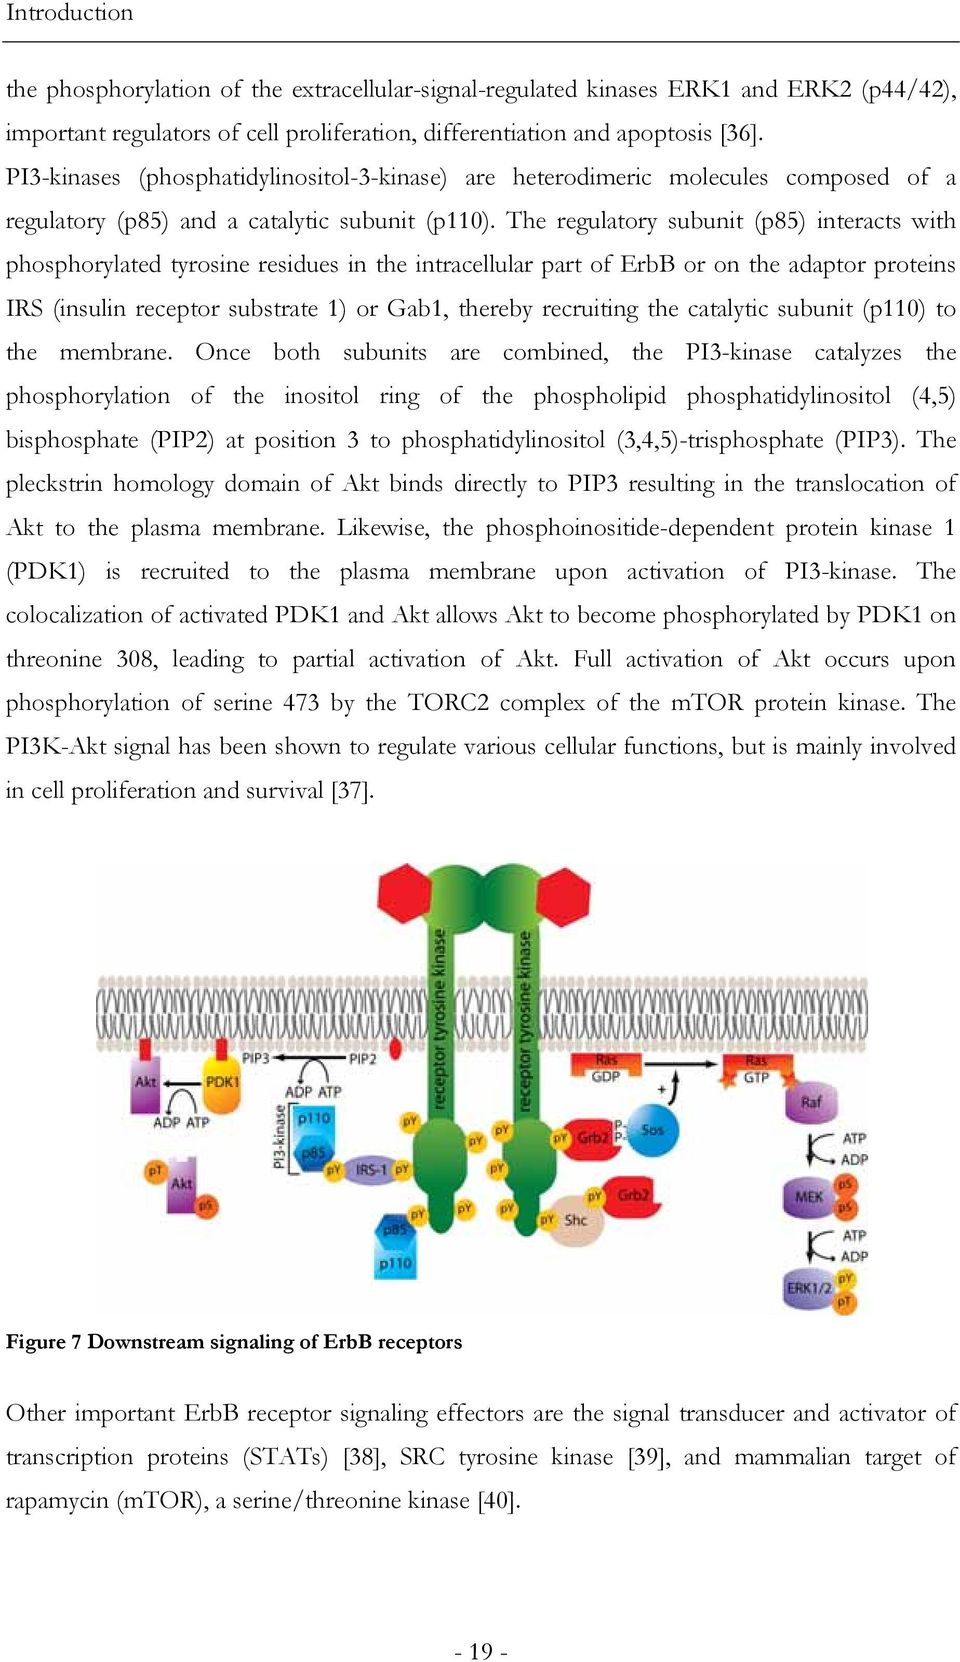 The regulatory subunit (p85) interacts with phosphorylated tyrosine residues in the intracellular part of ErbB or on the adaptor proteins IRS (insulin receptor substrate 1) or Gab1, thereby